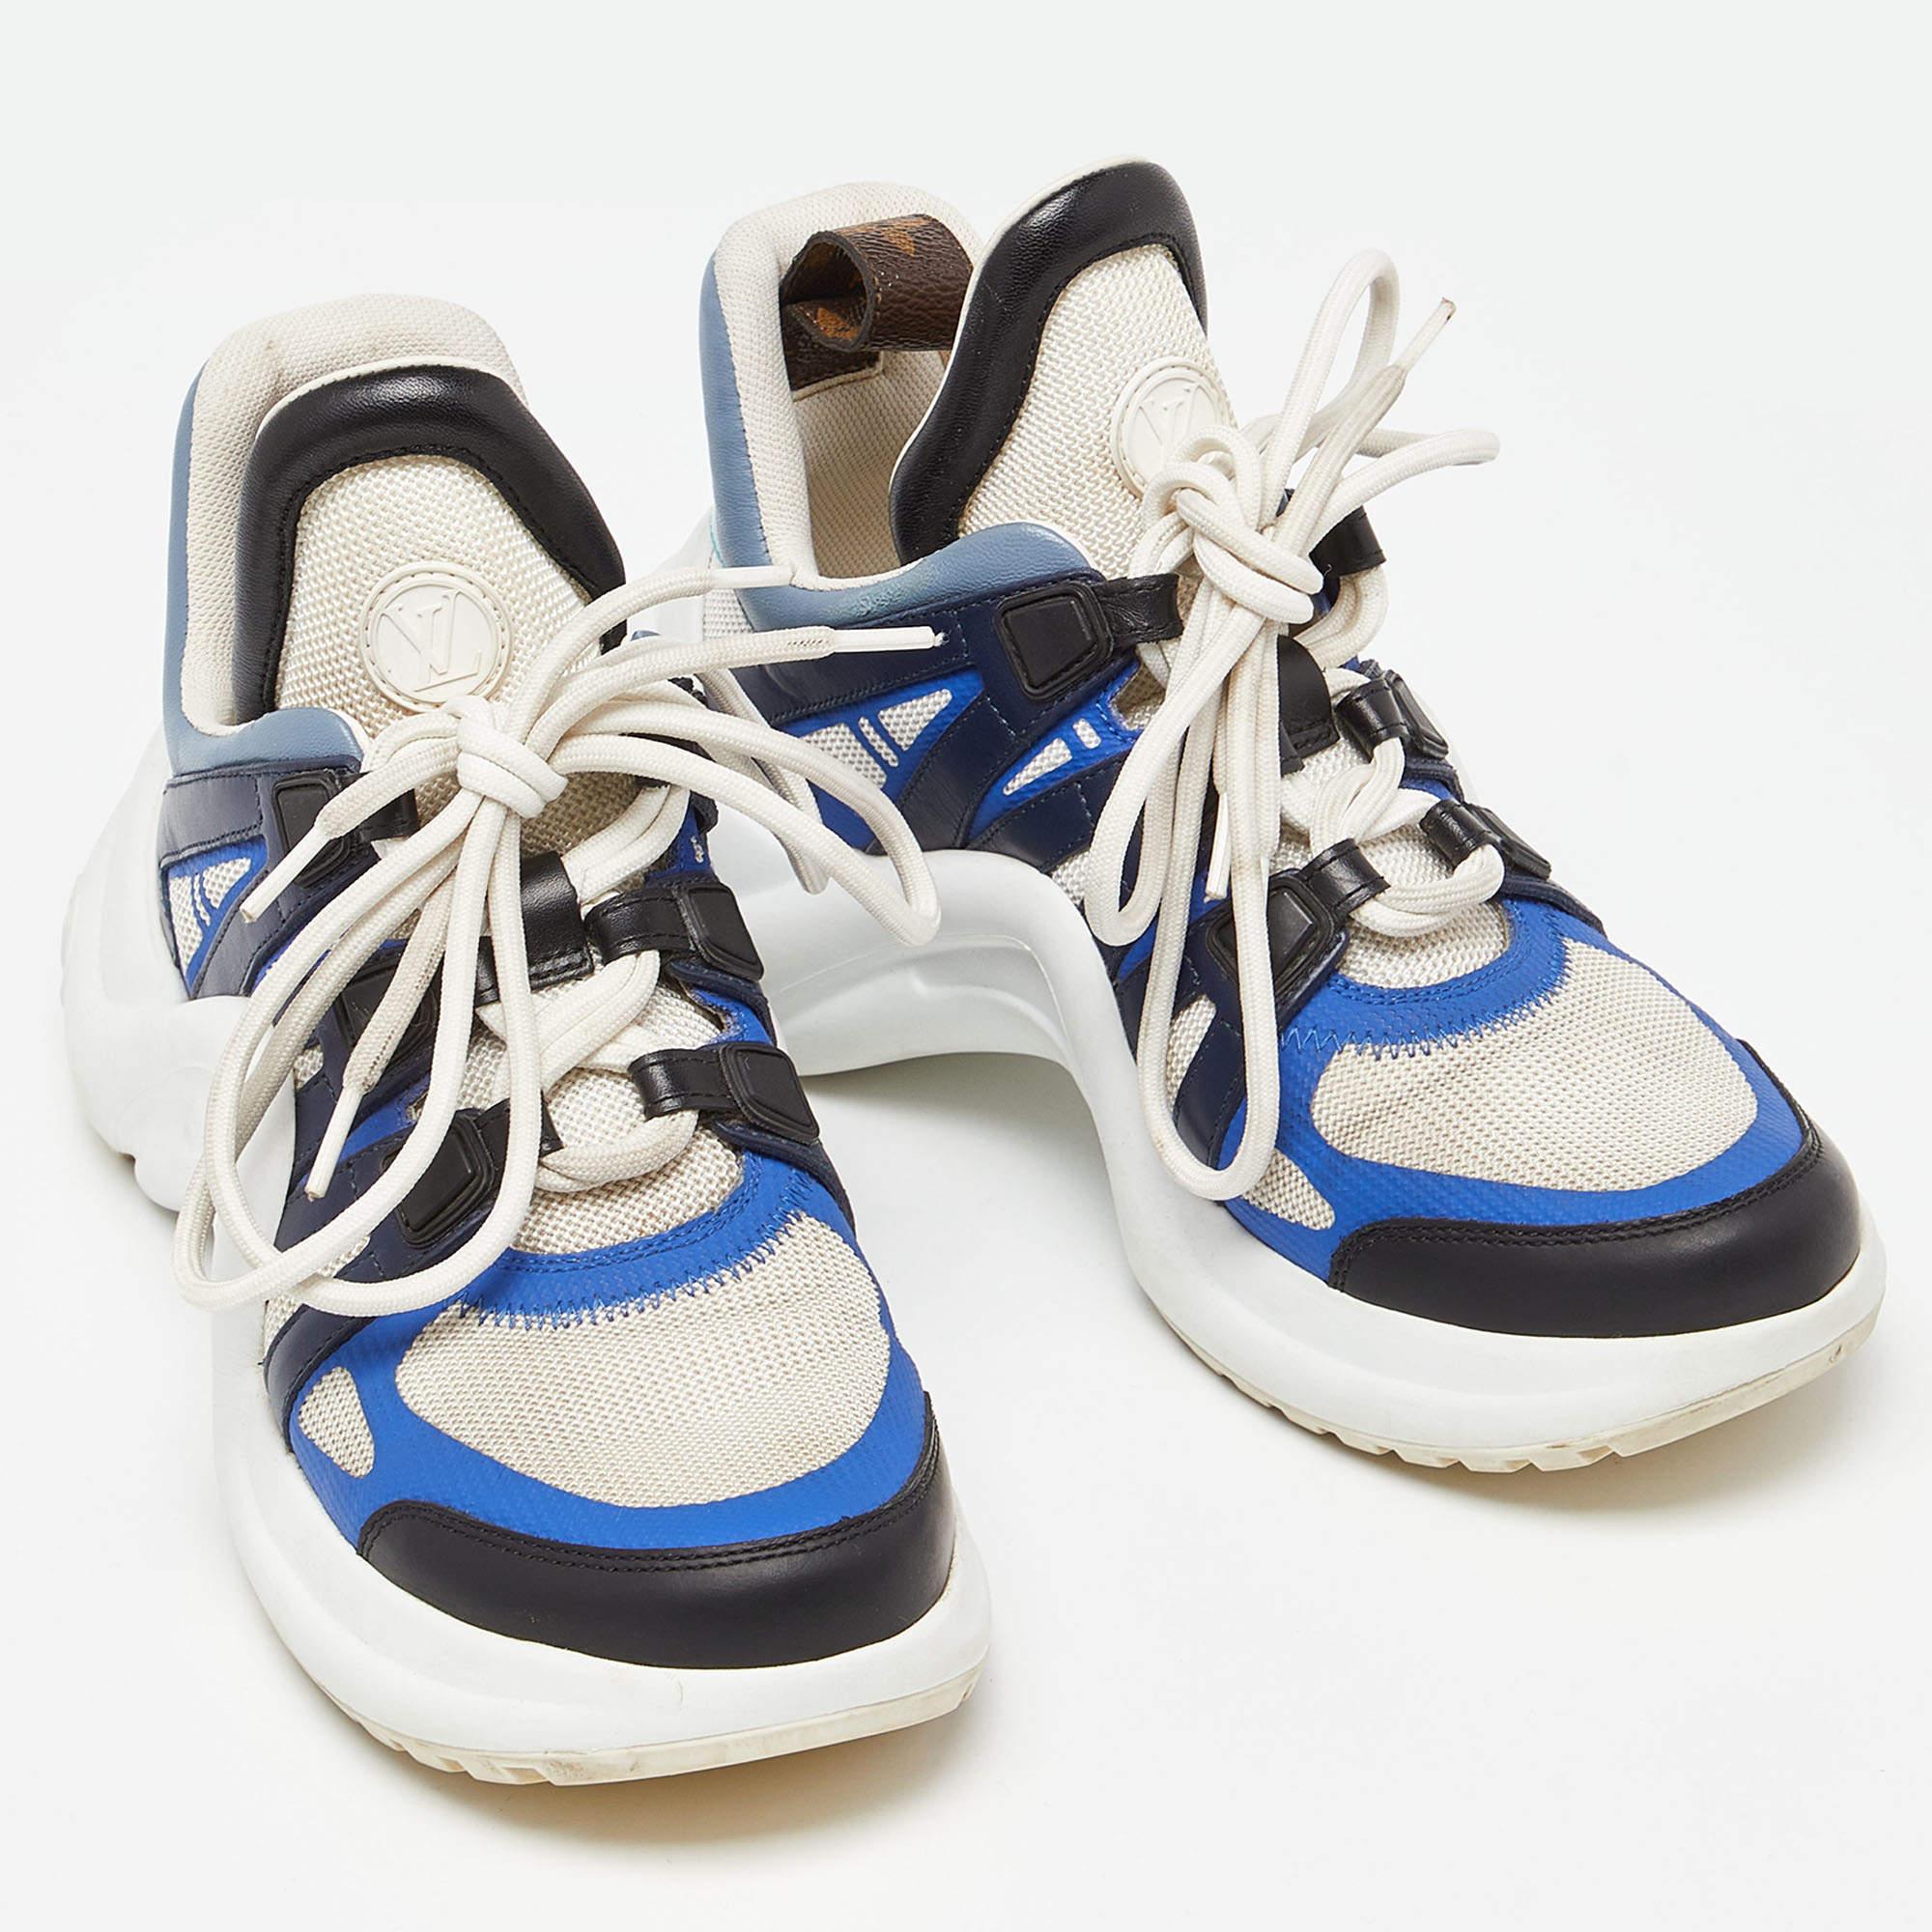 Women's Louis Vuitton Tricolor Mesh and Leather Archlight Sneakers Size 36 For Sale